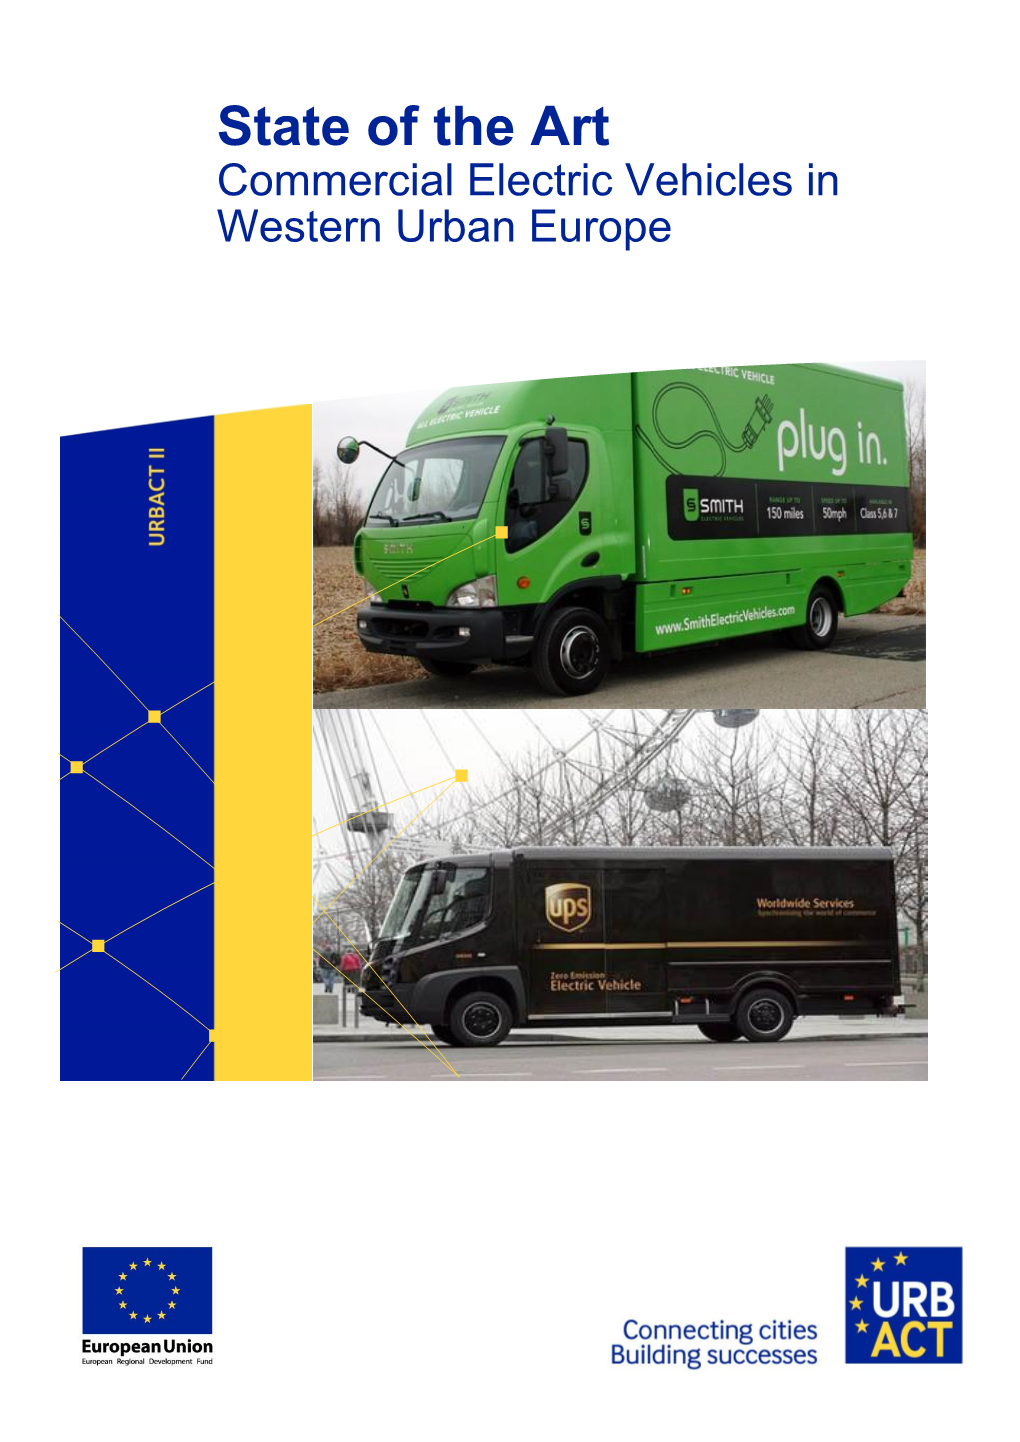 State of the Art Commercial Electric Vehicles in Western Urban Europe